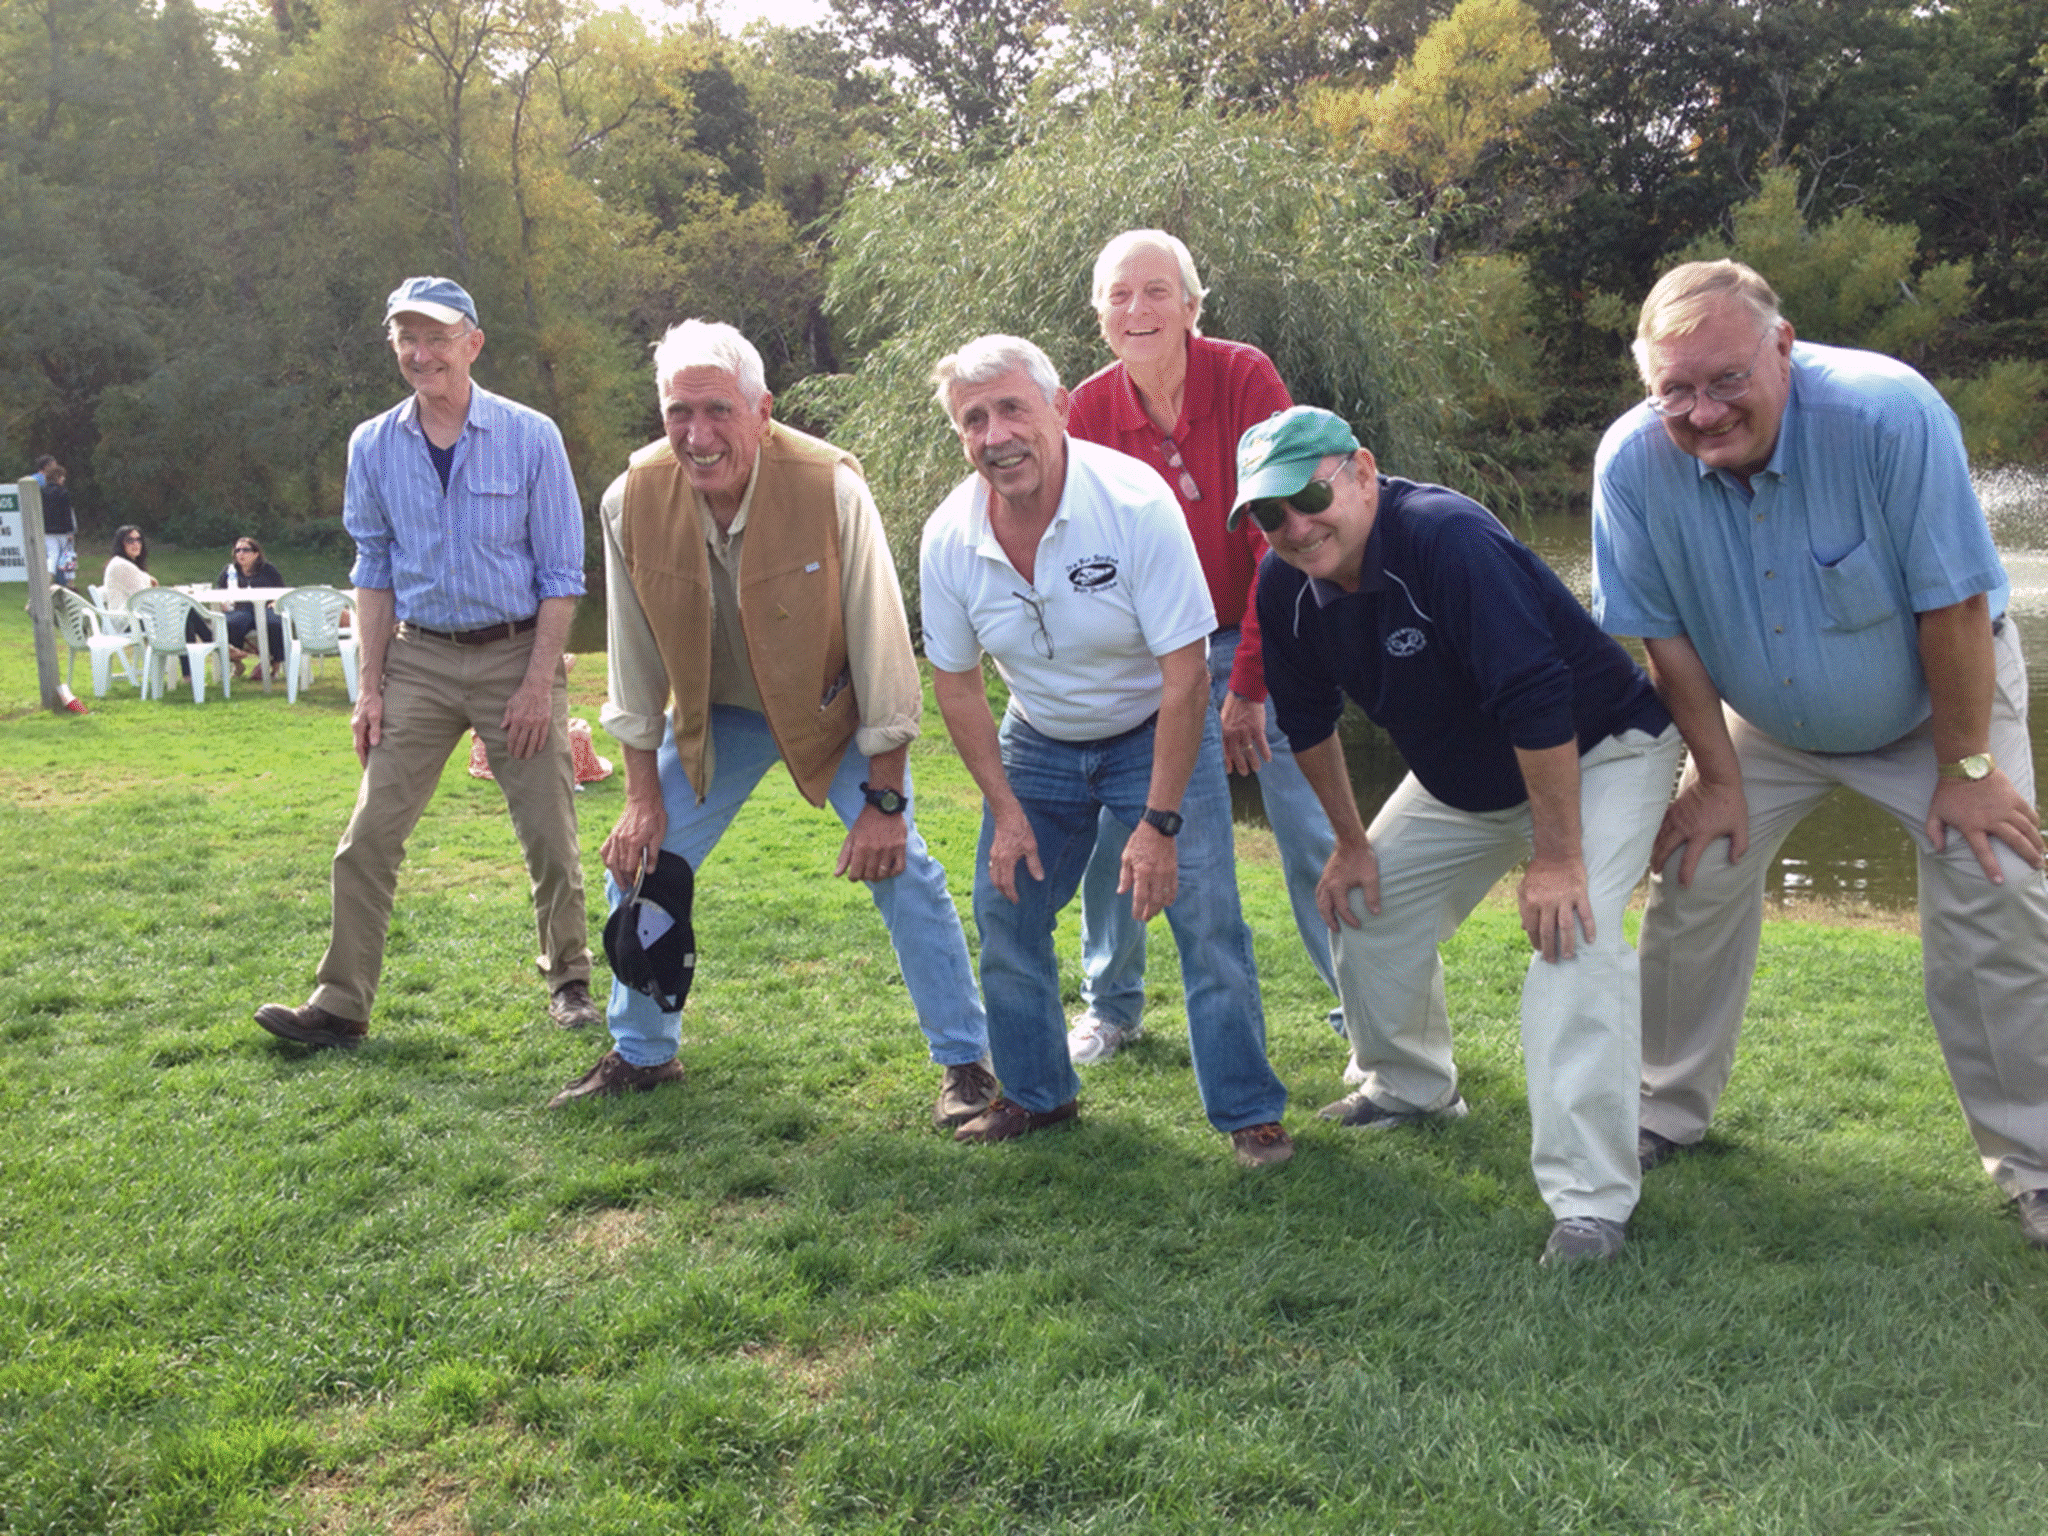 A group of men in a field

Description automatically generated with low confidence